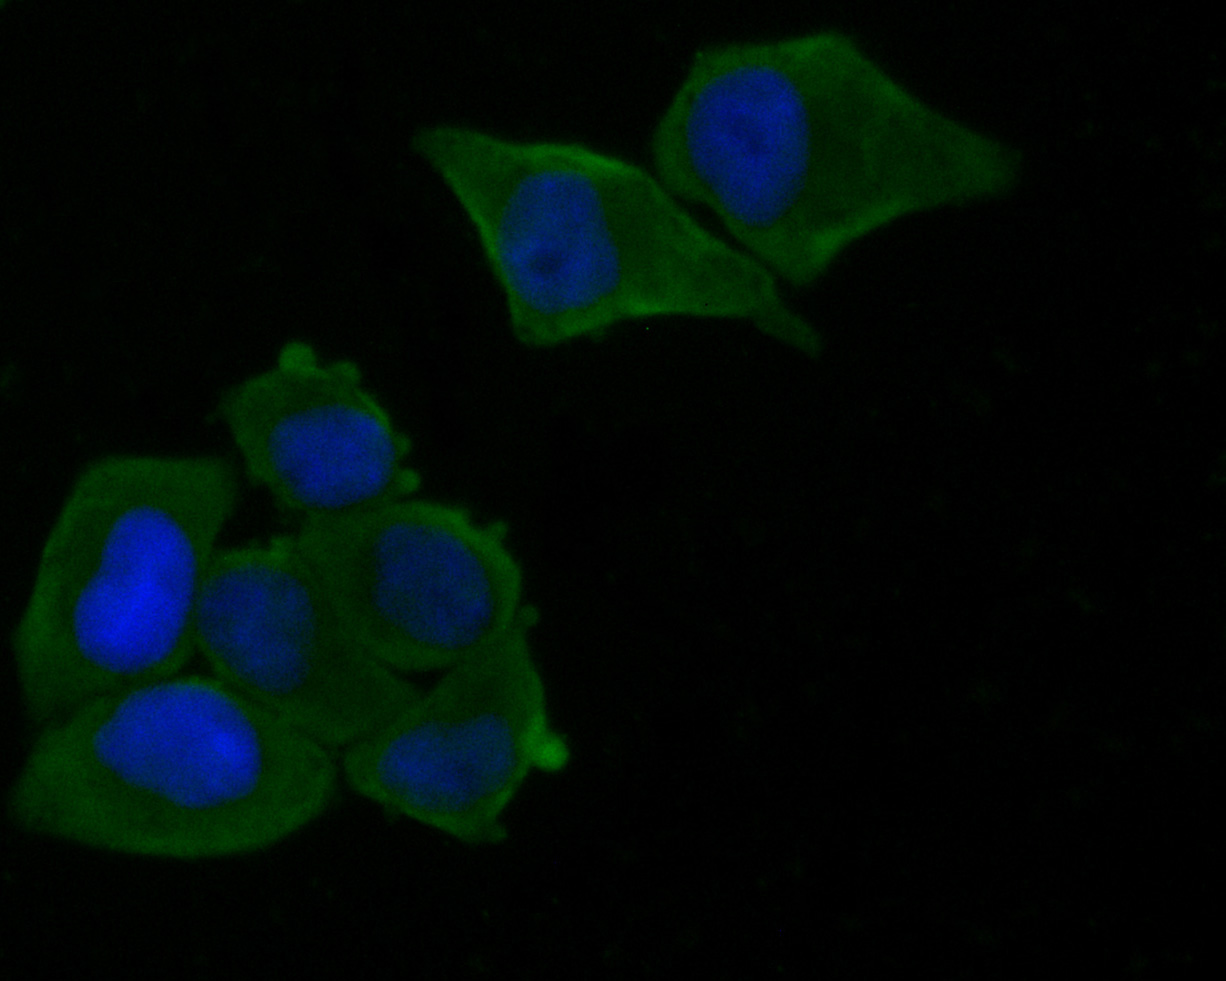 ICC staining of Munc13-4 in Hela cells (green). Formalin fixed cells were permeabilized with 0.1% Triton X-100 in TBS for 10 minutes at room temperature and blocked with 1% Blocker BSA for 15 minutes at room temperature. Cells were probed with the primary antibody (HA500052, 1/200) for 1 hour at room temperature, washed with PBS. Alexa Fluor®488 Goat anti-Rabbit IgG was used as the secondary antibody at 1/1,000 dilution. The nuclear counter stain is DAPI (blue).